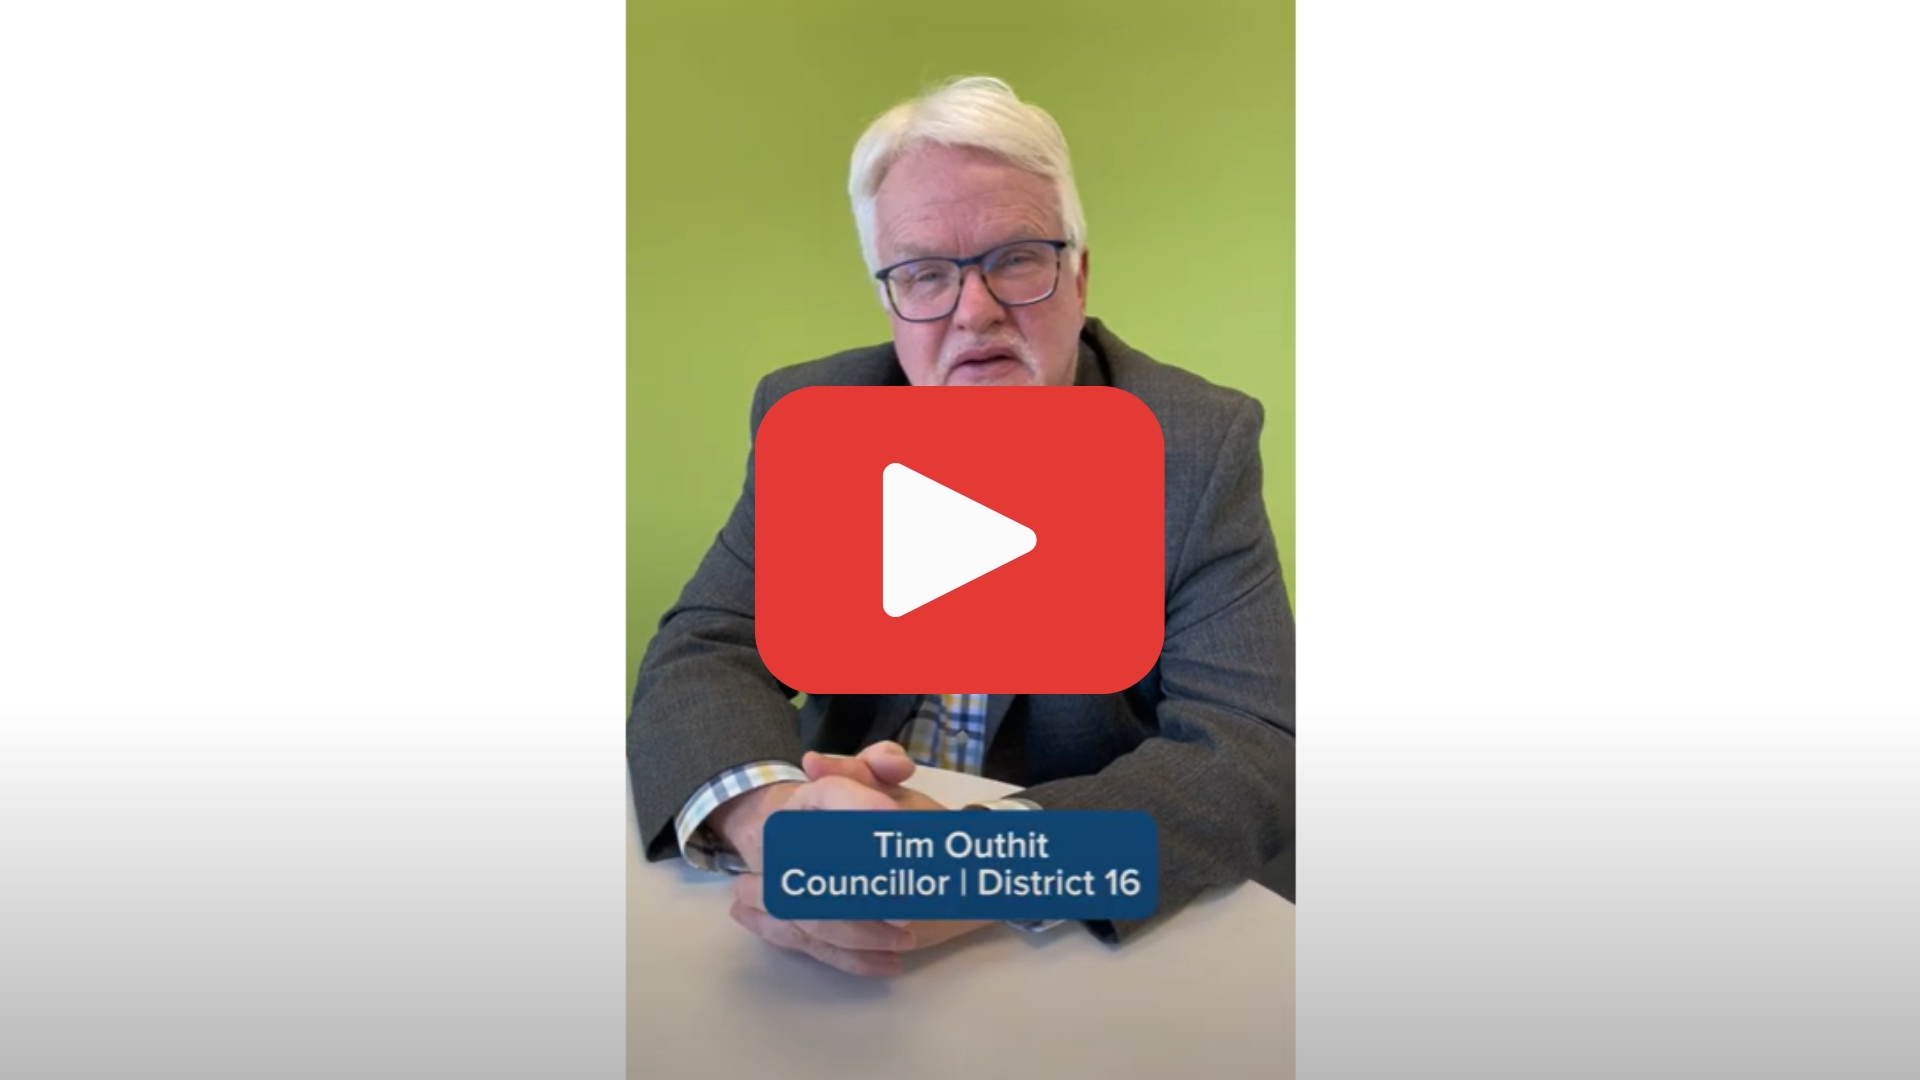 Video screenshot of Councillor Tim Outhit sitting at a desk with a YouTube "play button" superimposed on him.